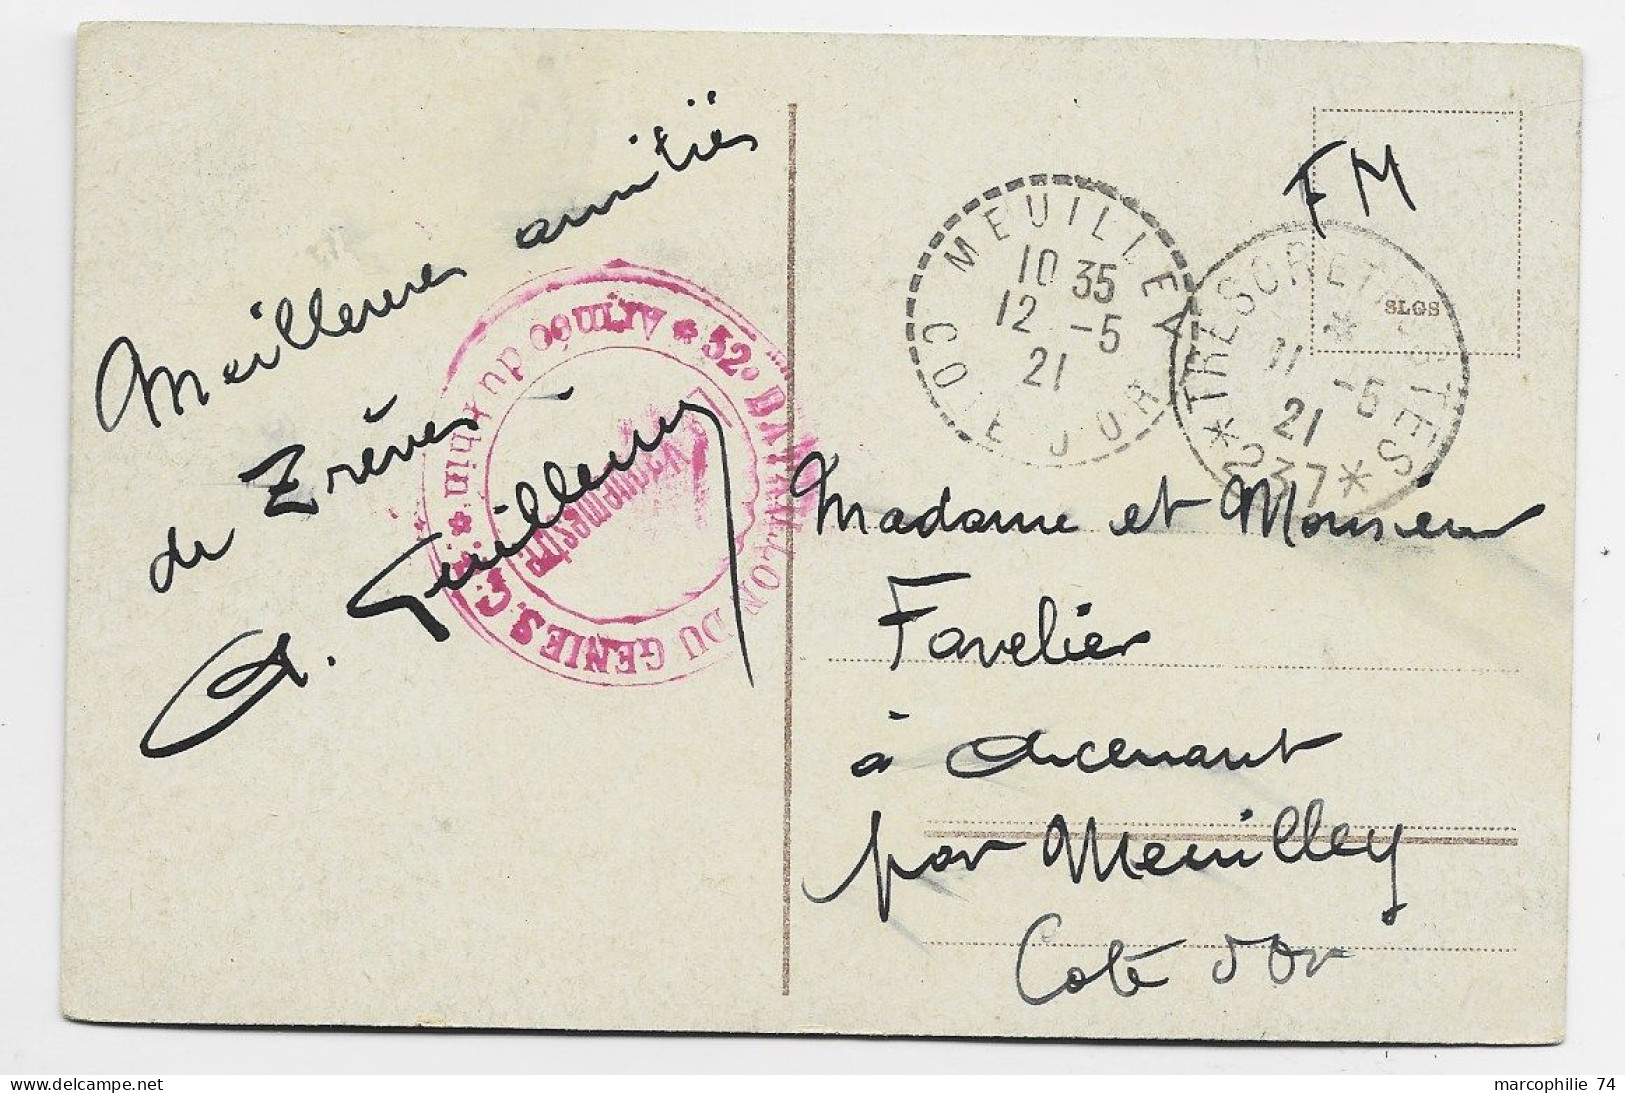 GERMANY CARTE TRIER + TRESOR ET POSTES *237* 1921 + CACHET ROUGE 52E BATAILLON DU GENIE ARMEE DU RHIN - Military Postmarks From 1900 (out Of Wars Periods)